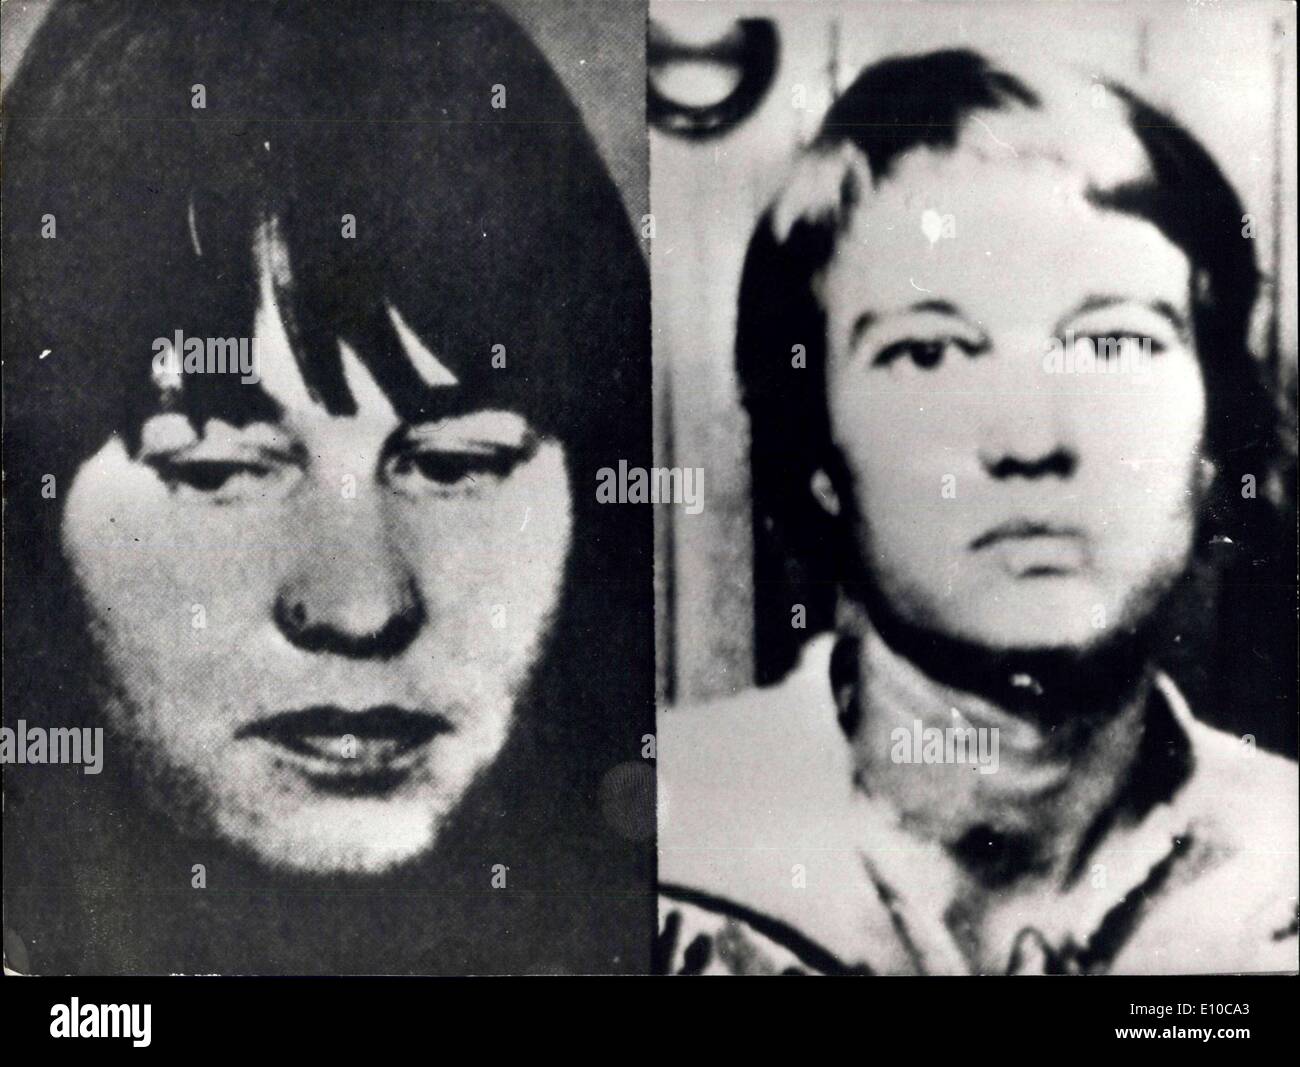 Jun. 07, 1972 - To Different Faces Of Ulrike Meinhof - The most Wanted Woman In West Germany: Following the arrest in Frankfurt Stock Photo